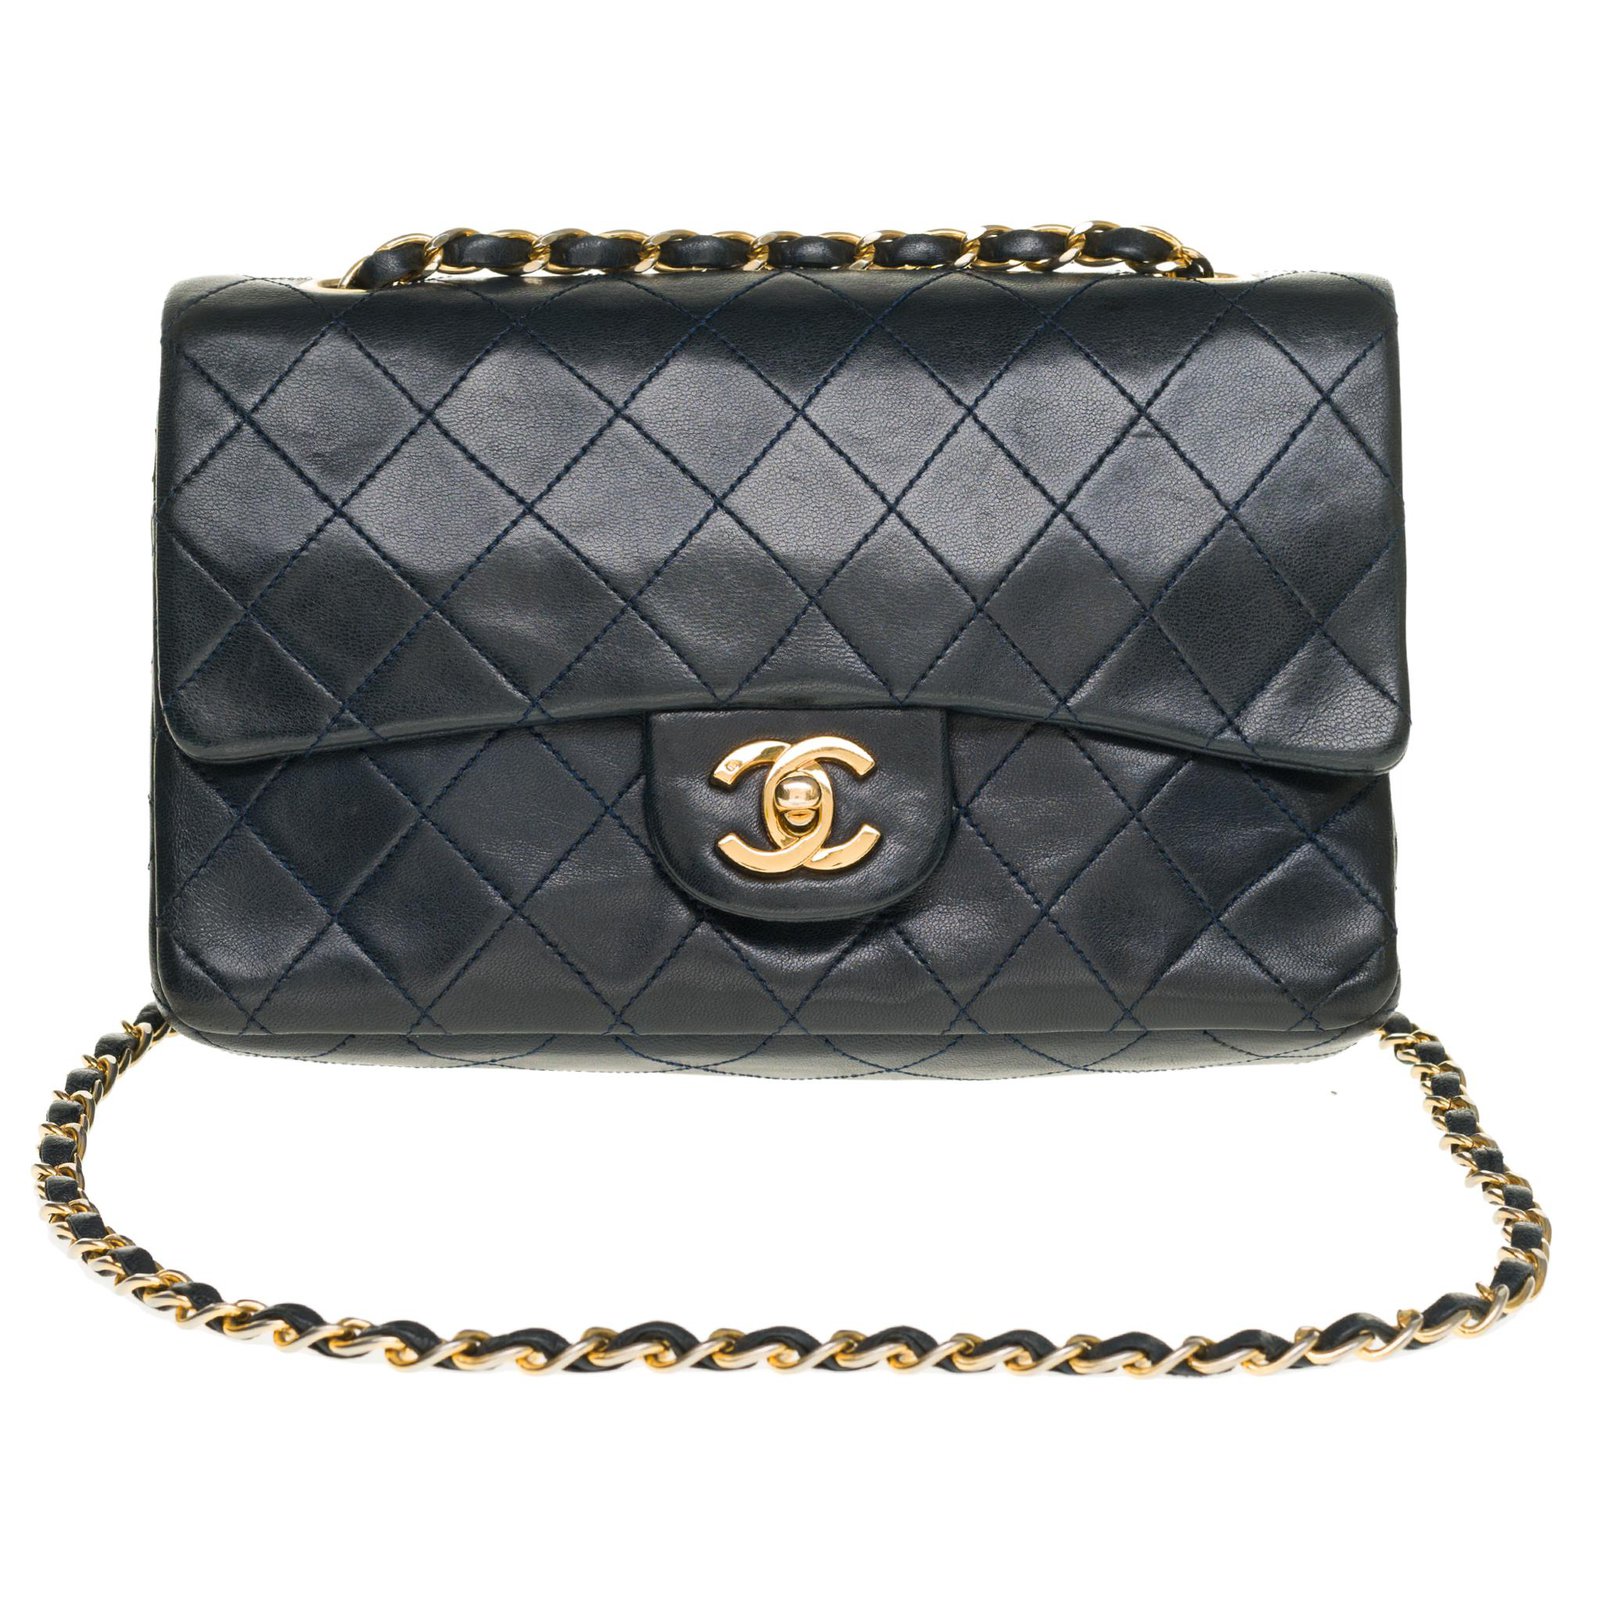 The highly sought after Chanel Timeless bag 23cm in navy blue